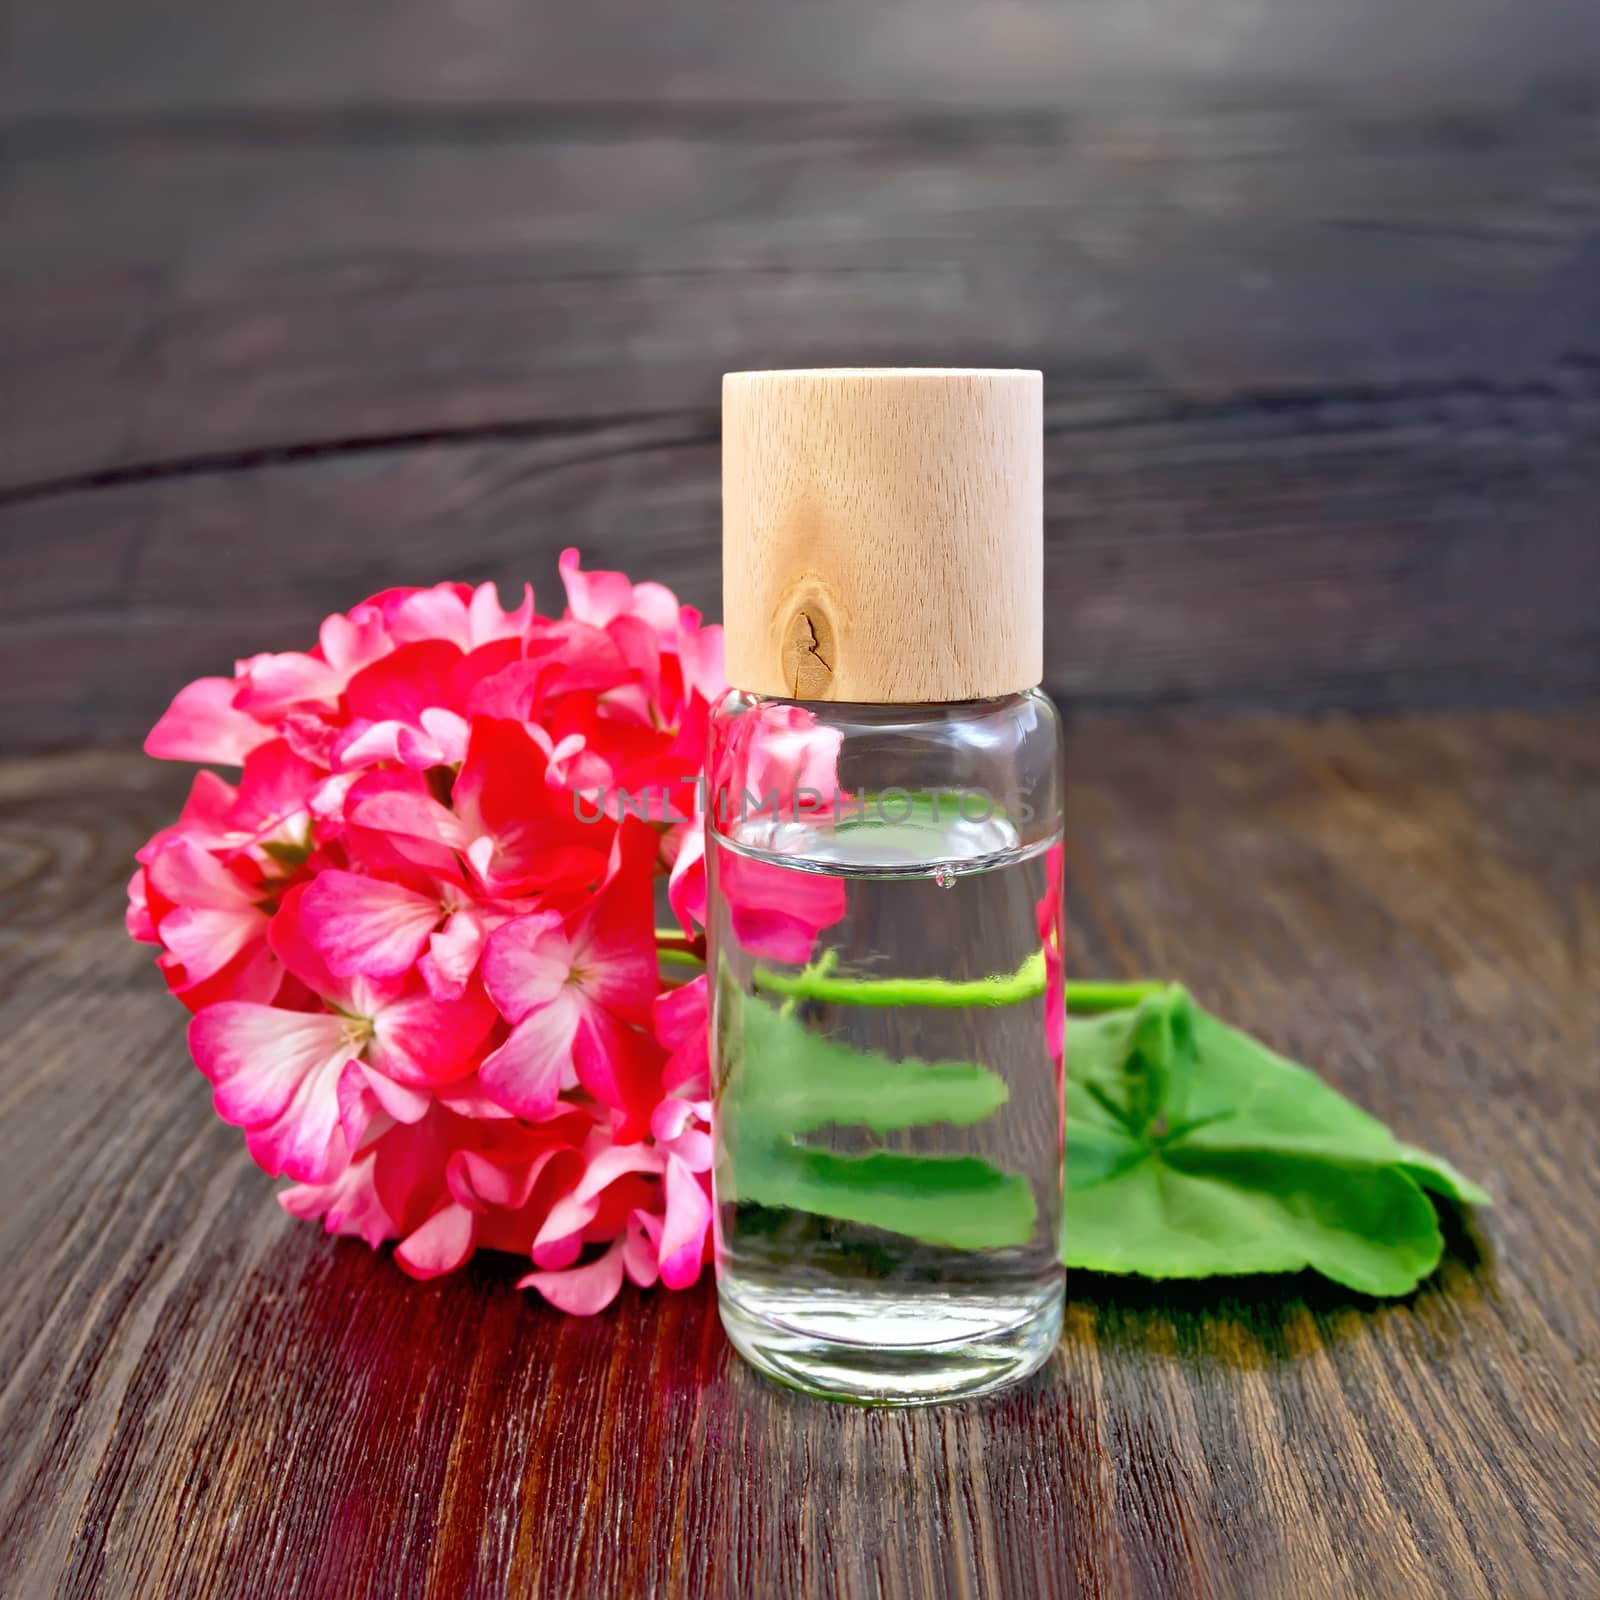 One vial of oil with green leaf and flower of pink geranium on a wooden boards background